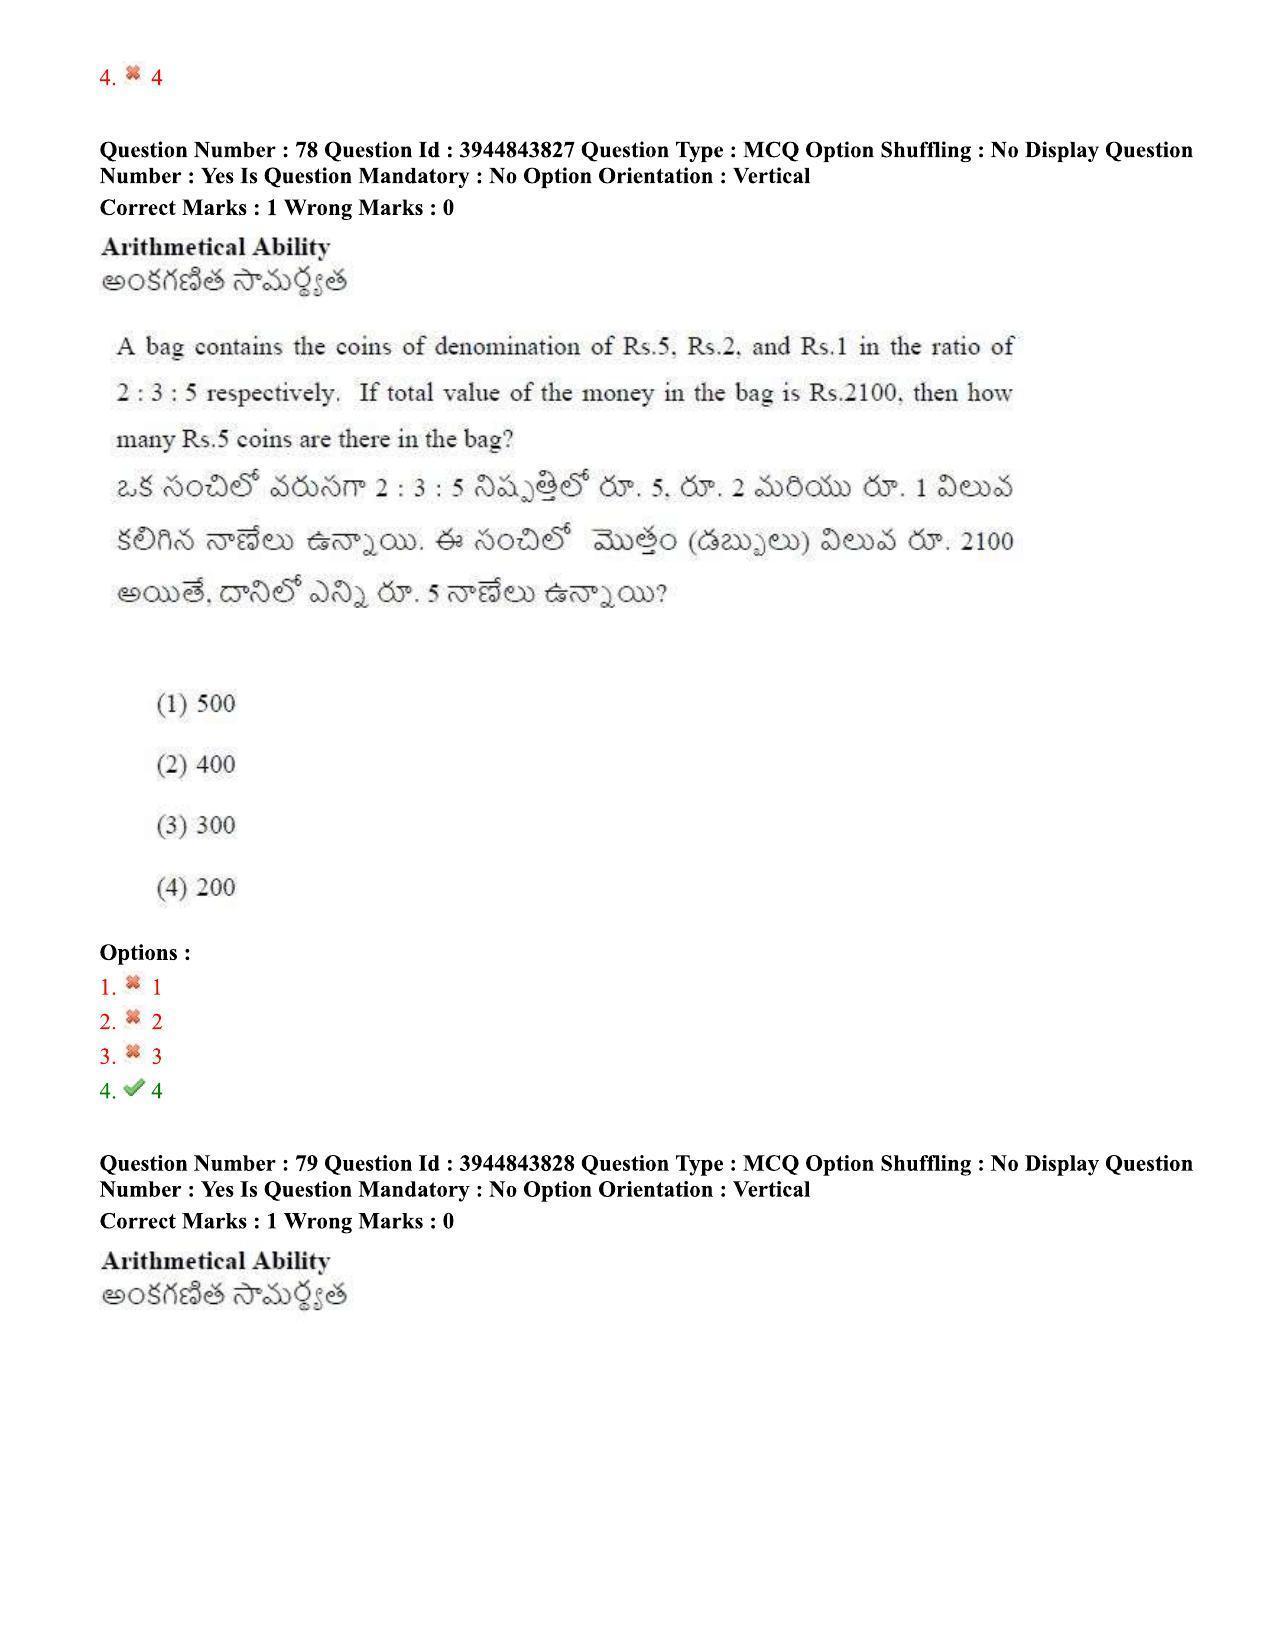 TS ICET 2020 Question Paper 1 - Oct 1, 2020	 - Page 60